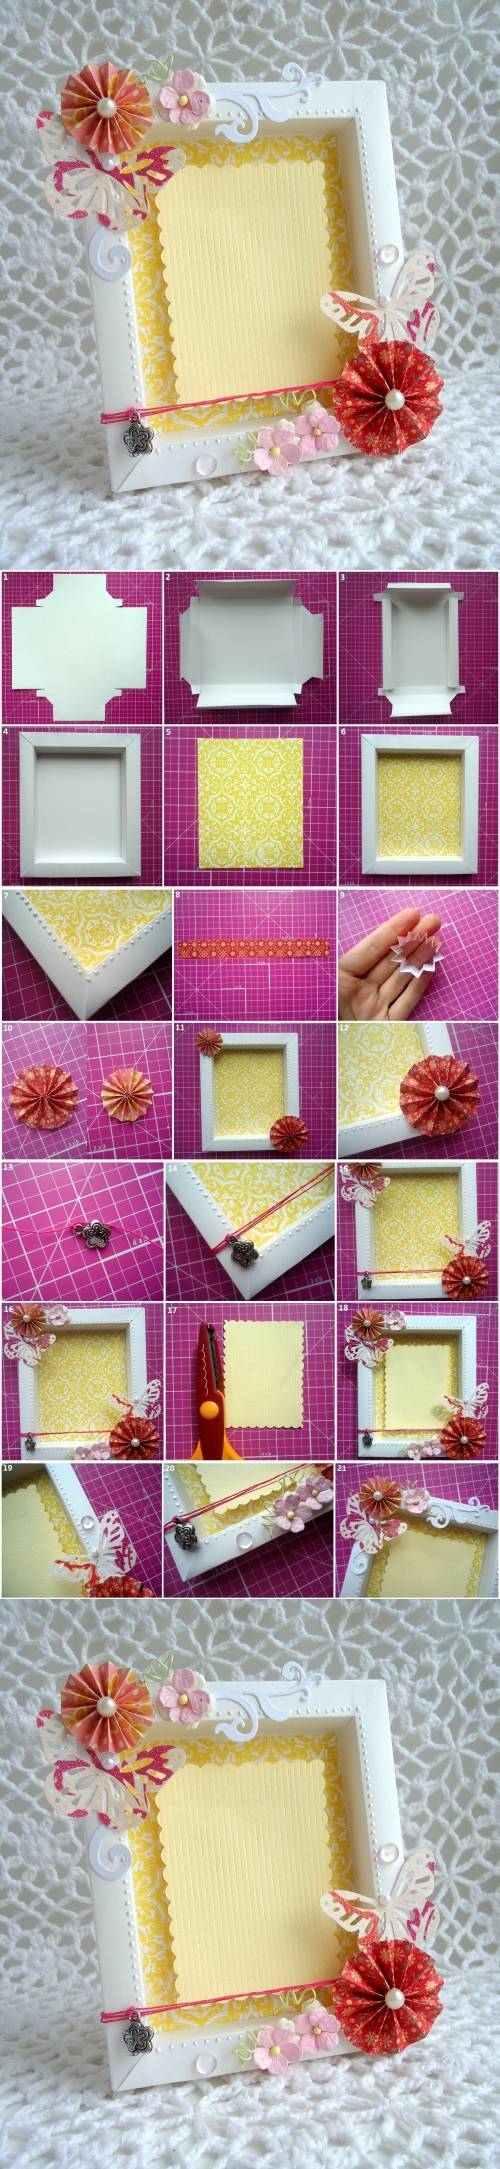 DIY Cool Picture Frame Designs